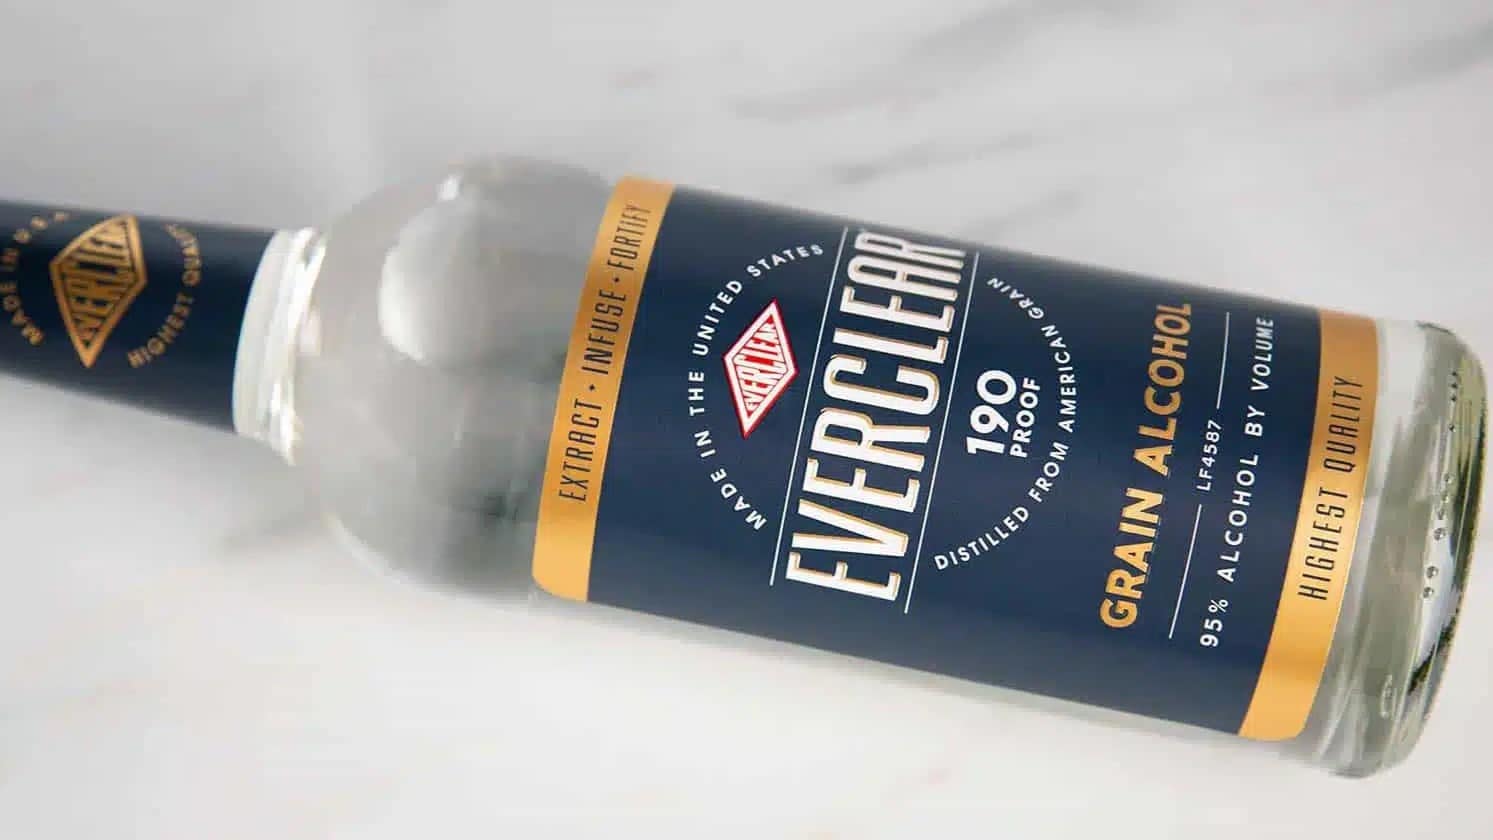 No 2. Everclear 190 | Alcohol by volume content | 95% | This American spirit has a big reputation and is famous for being practically tasteless. Despite Everclear being a pop culture hit (even inspiring the name of a rock band), its sale is illegal in multiple states including California and New York.